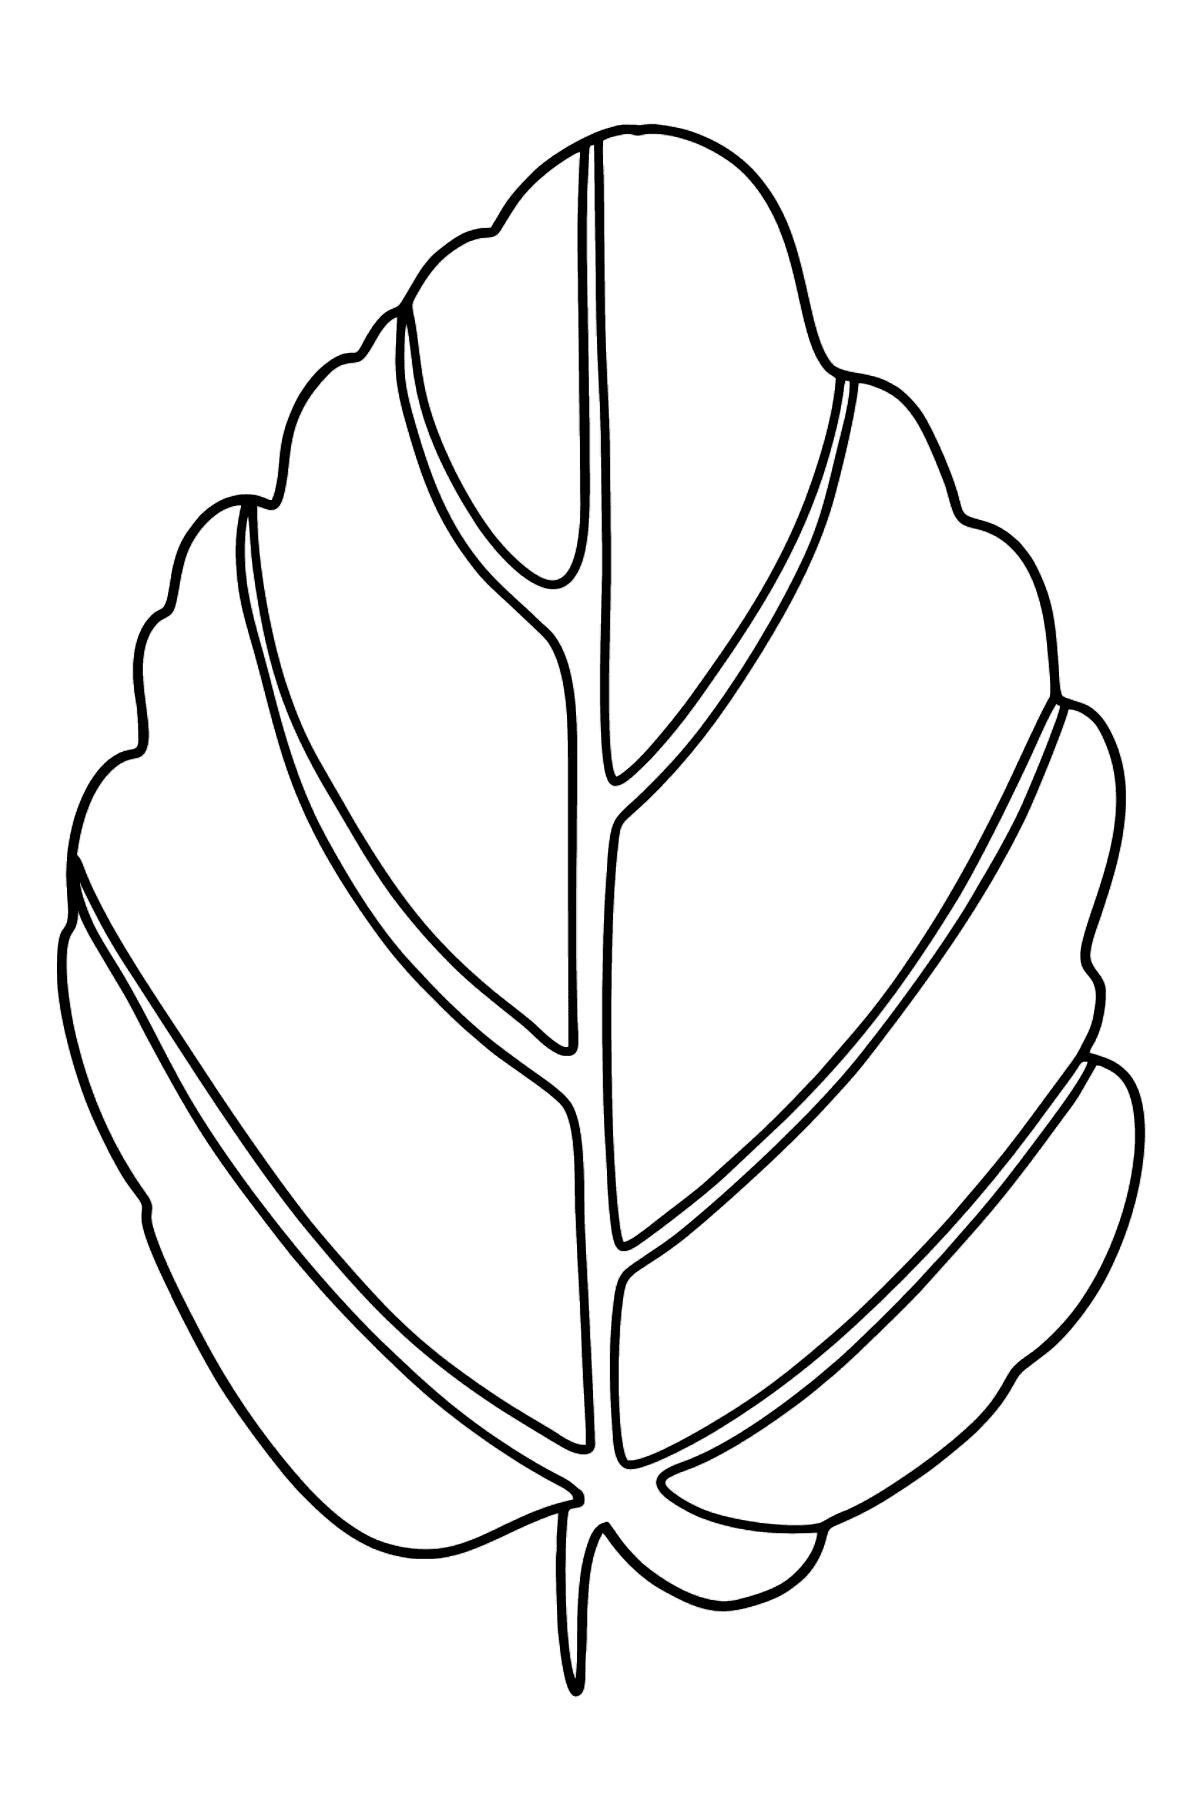 Hamamelis Leaf coloring page - Coloring Pages for Kids